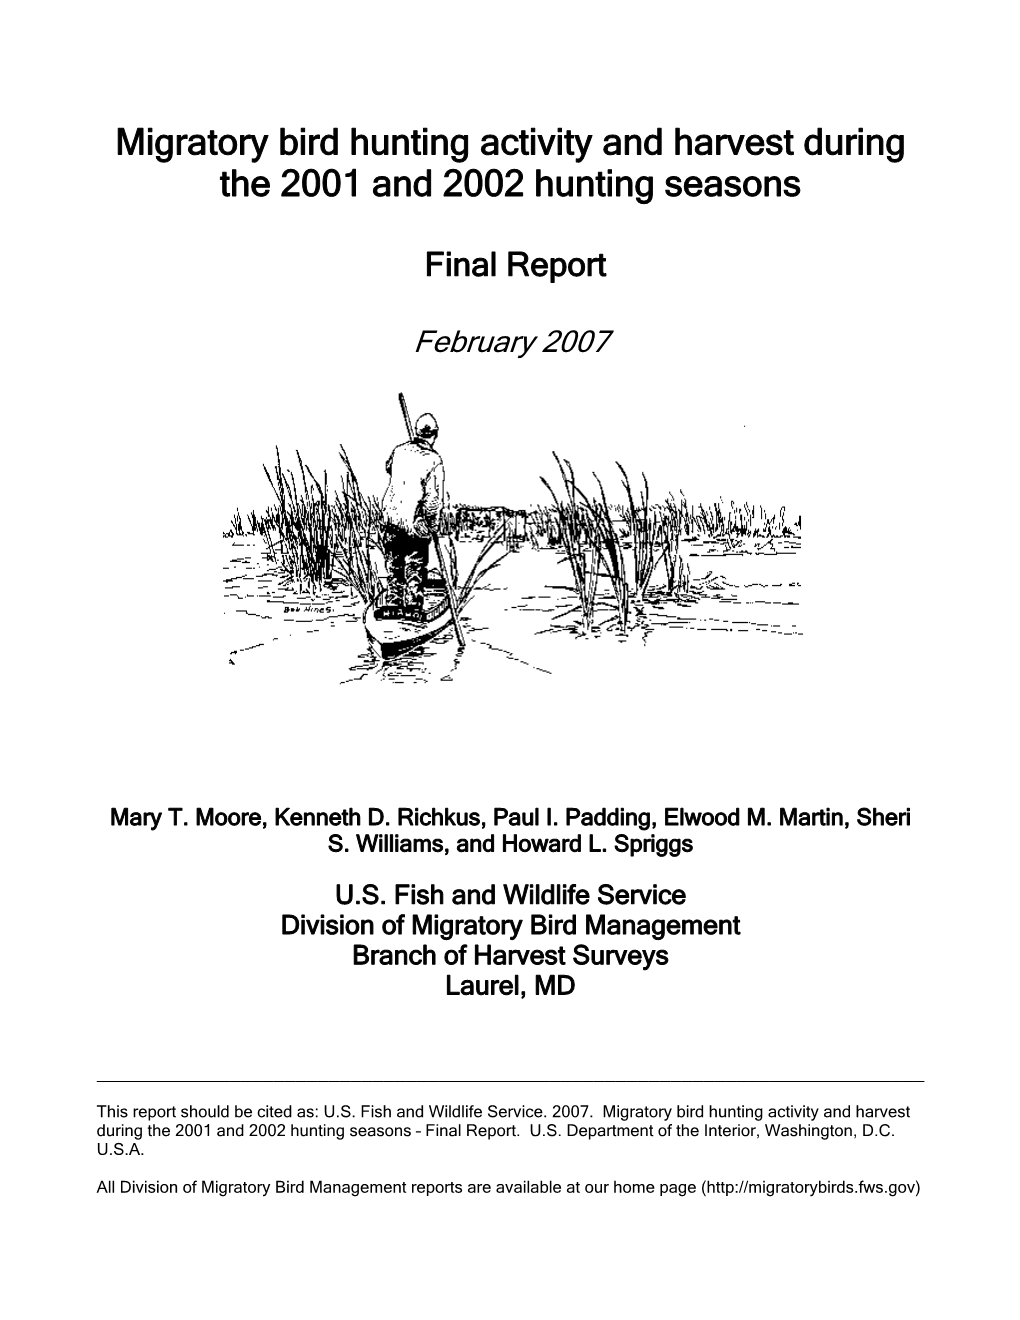 Migratory Bird Hunting Activity and Harvest During the 2001 and 2002 Hunting Seasons